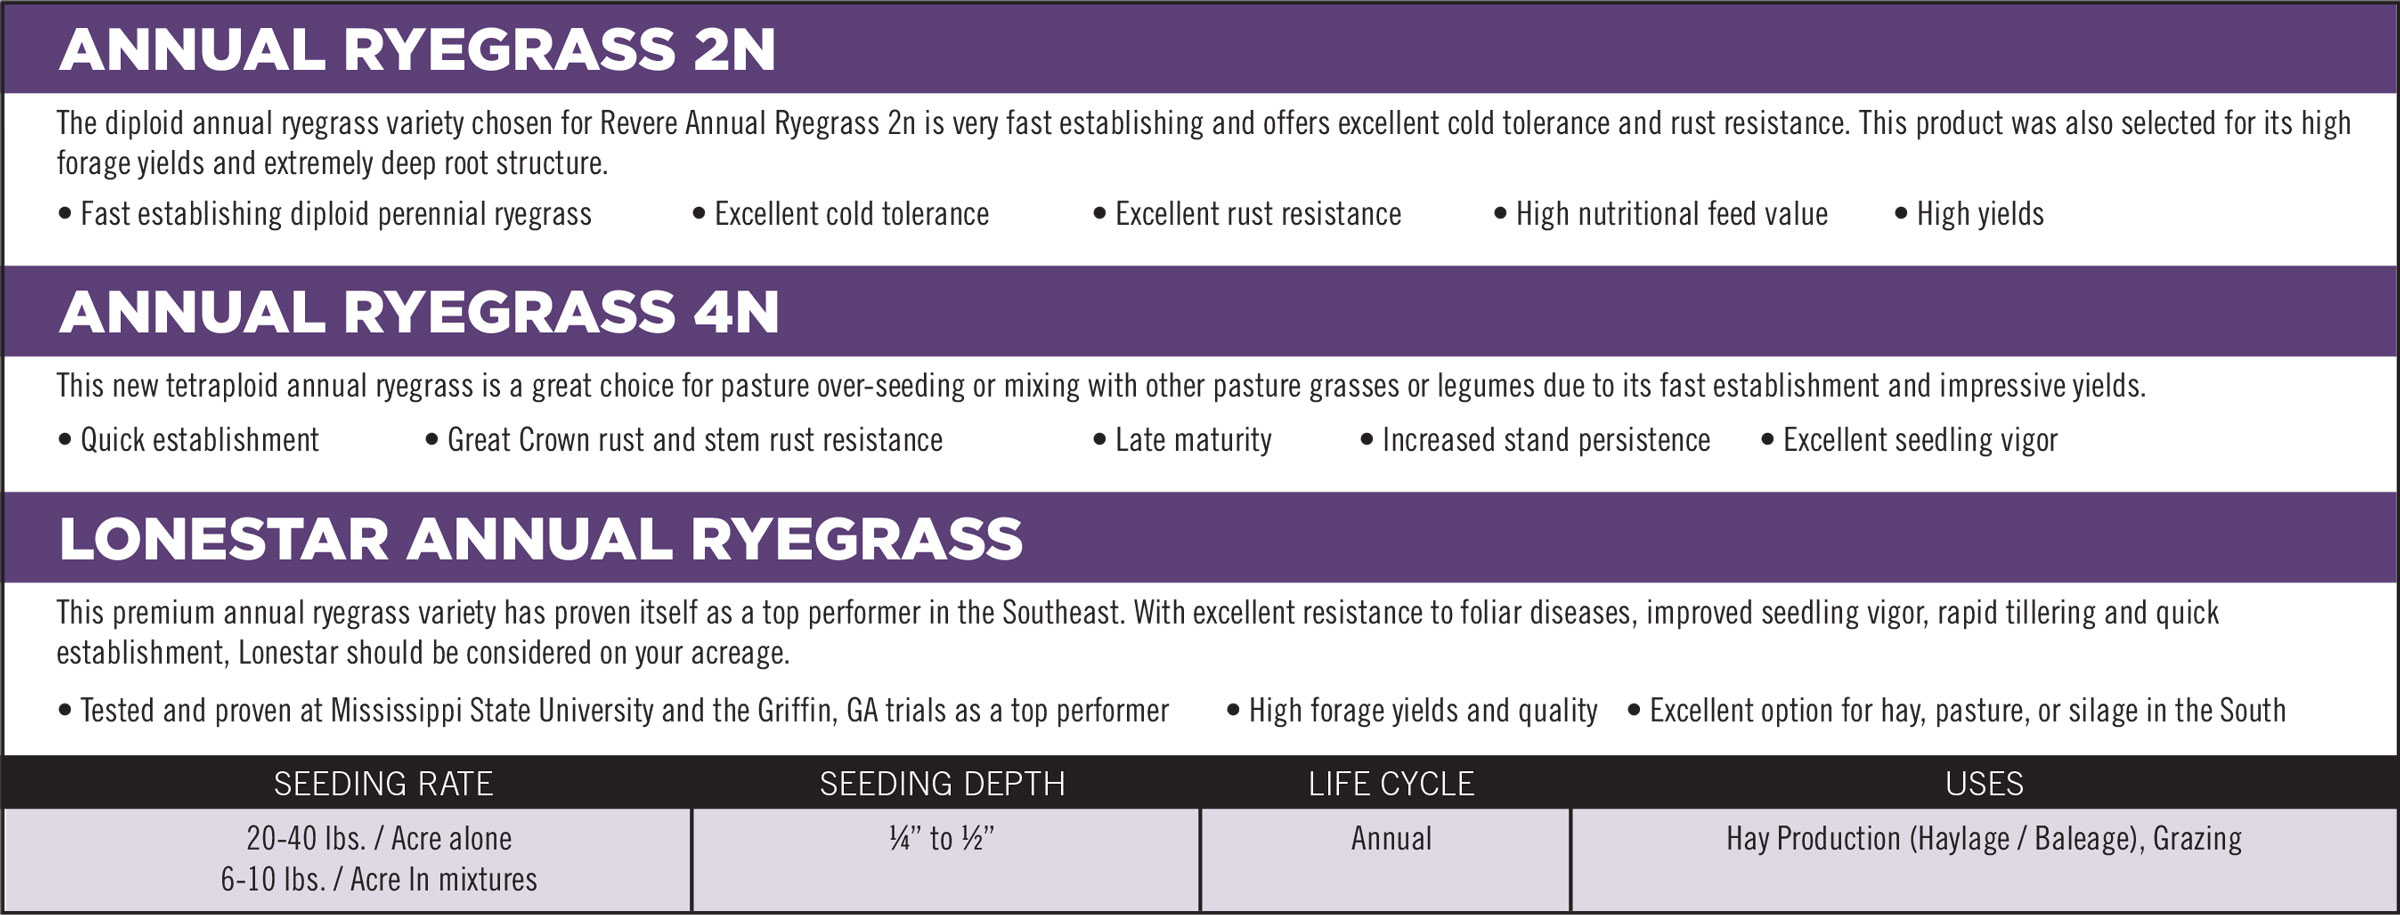 Annual Ryegrass Products